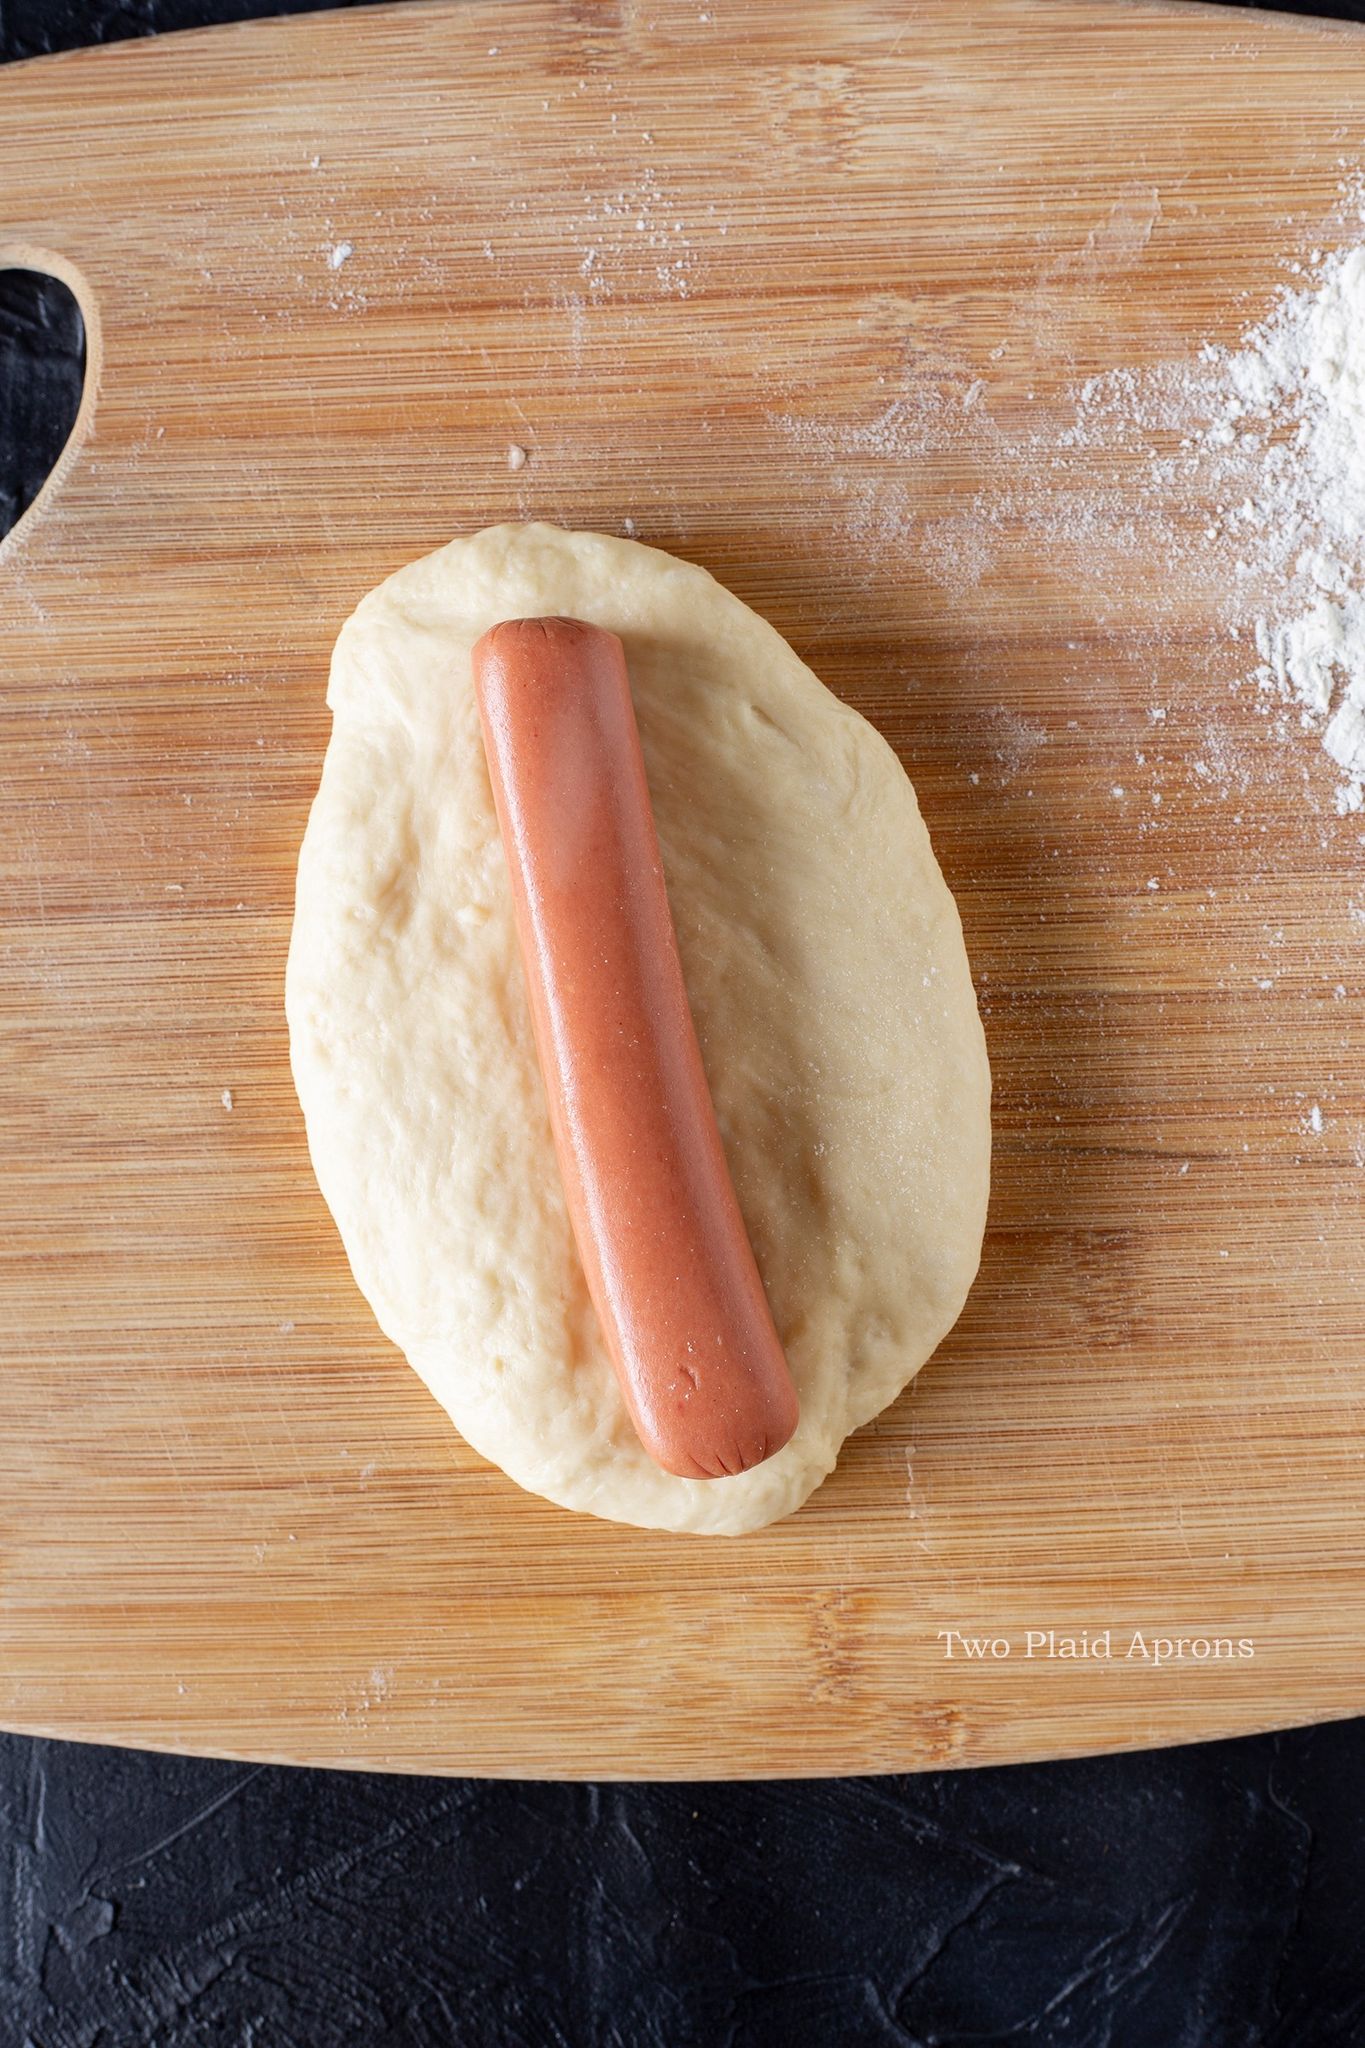 Sausage in the middle of the raw dough